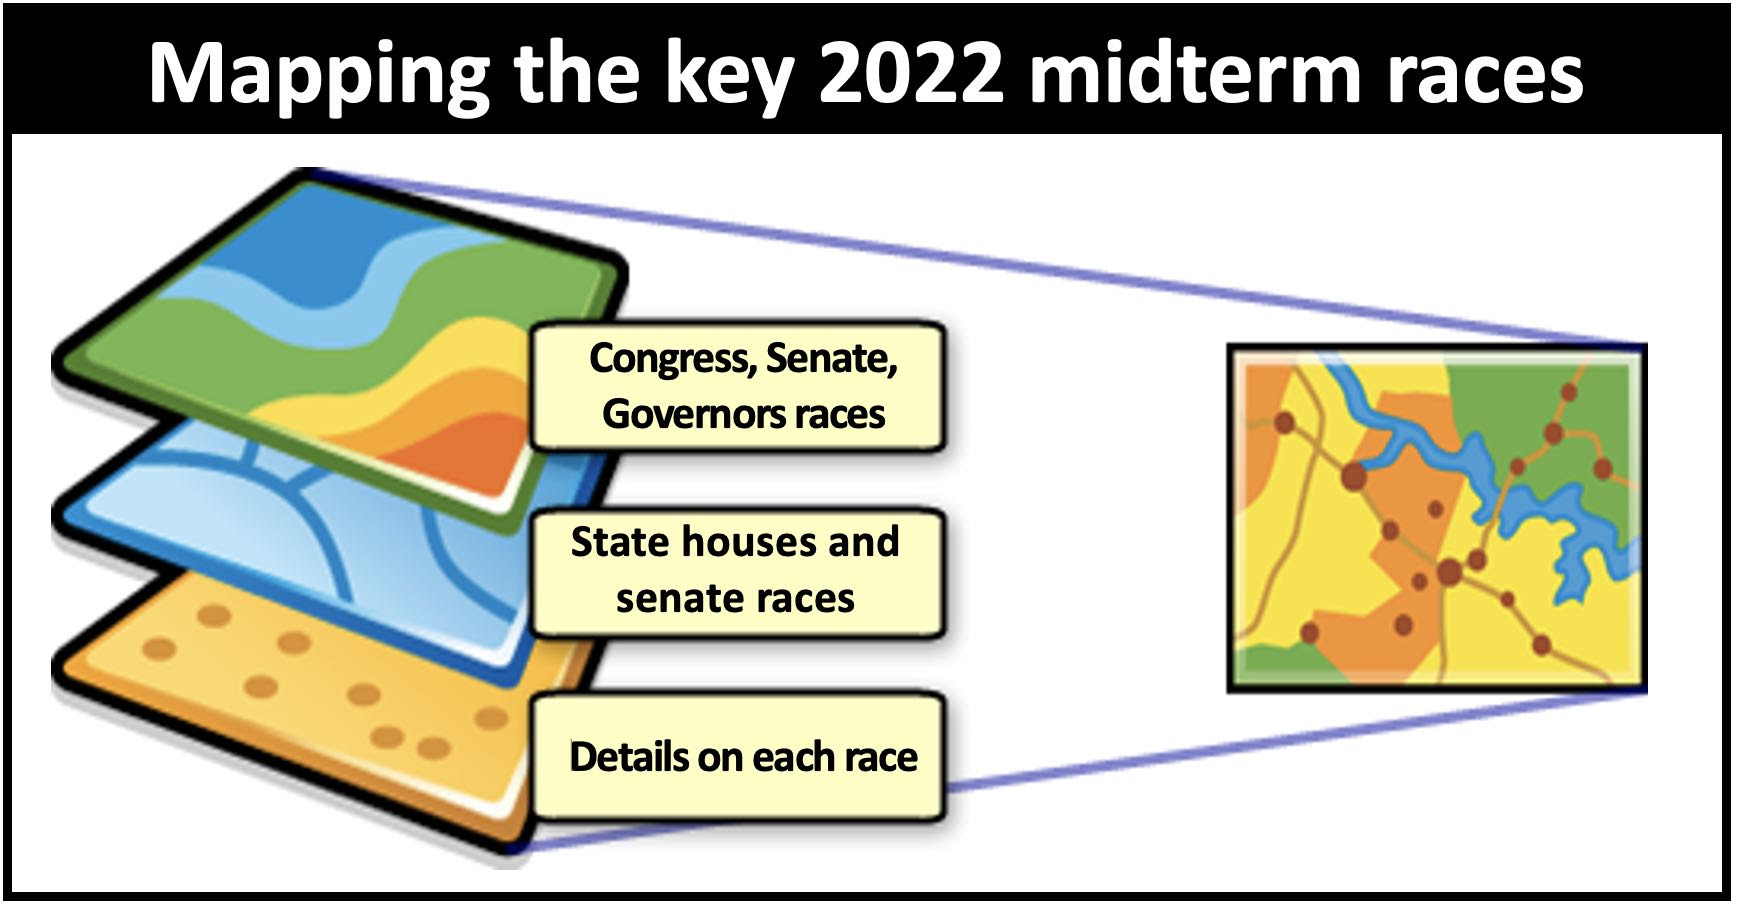 Key 2022 Midterm races shown on a single map.